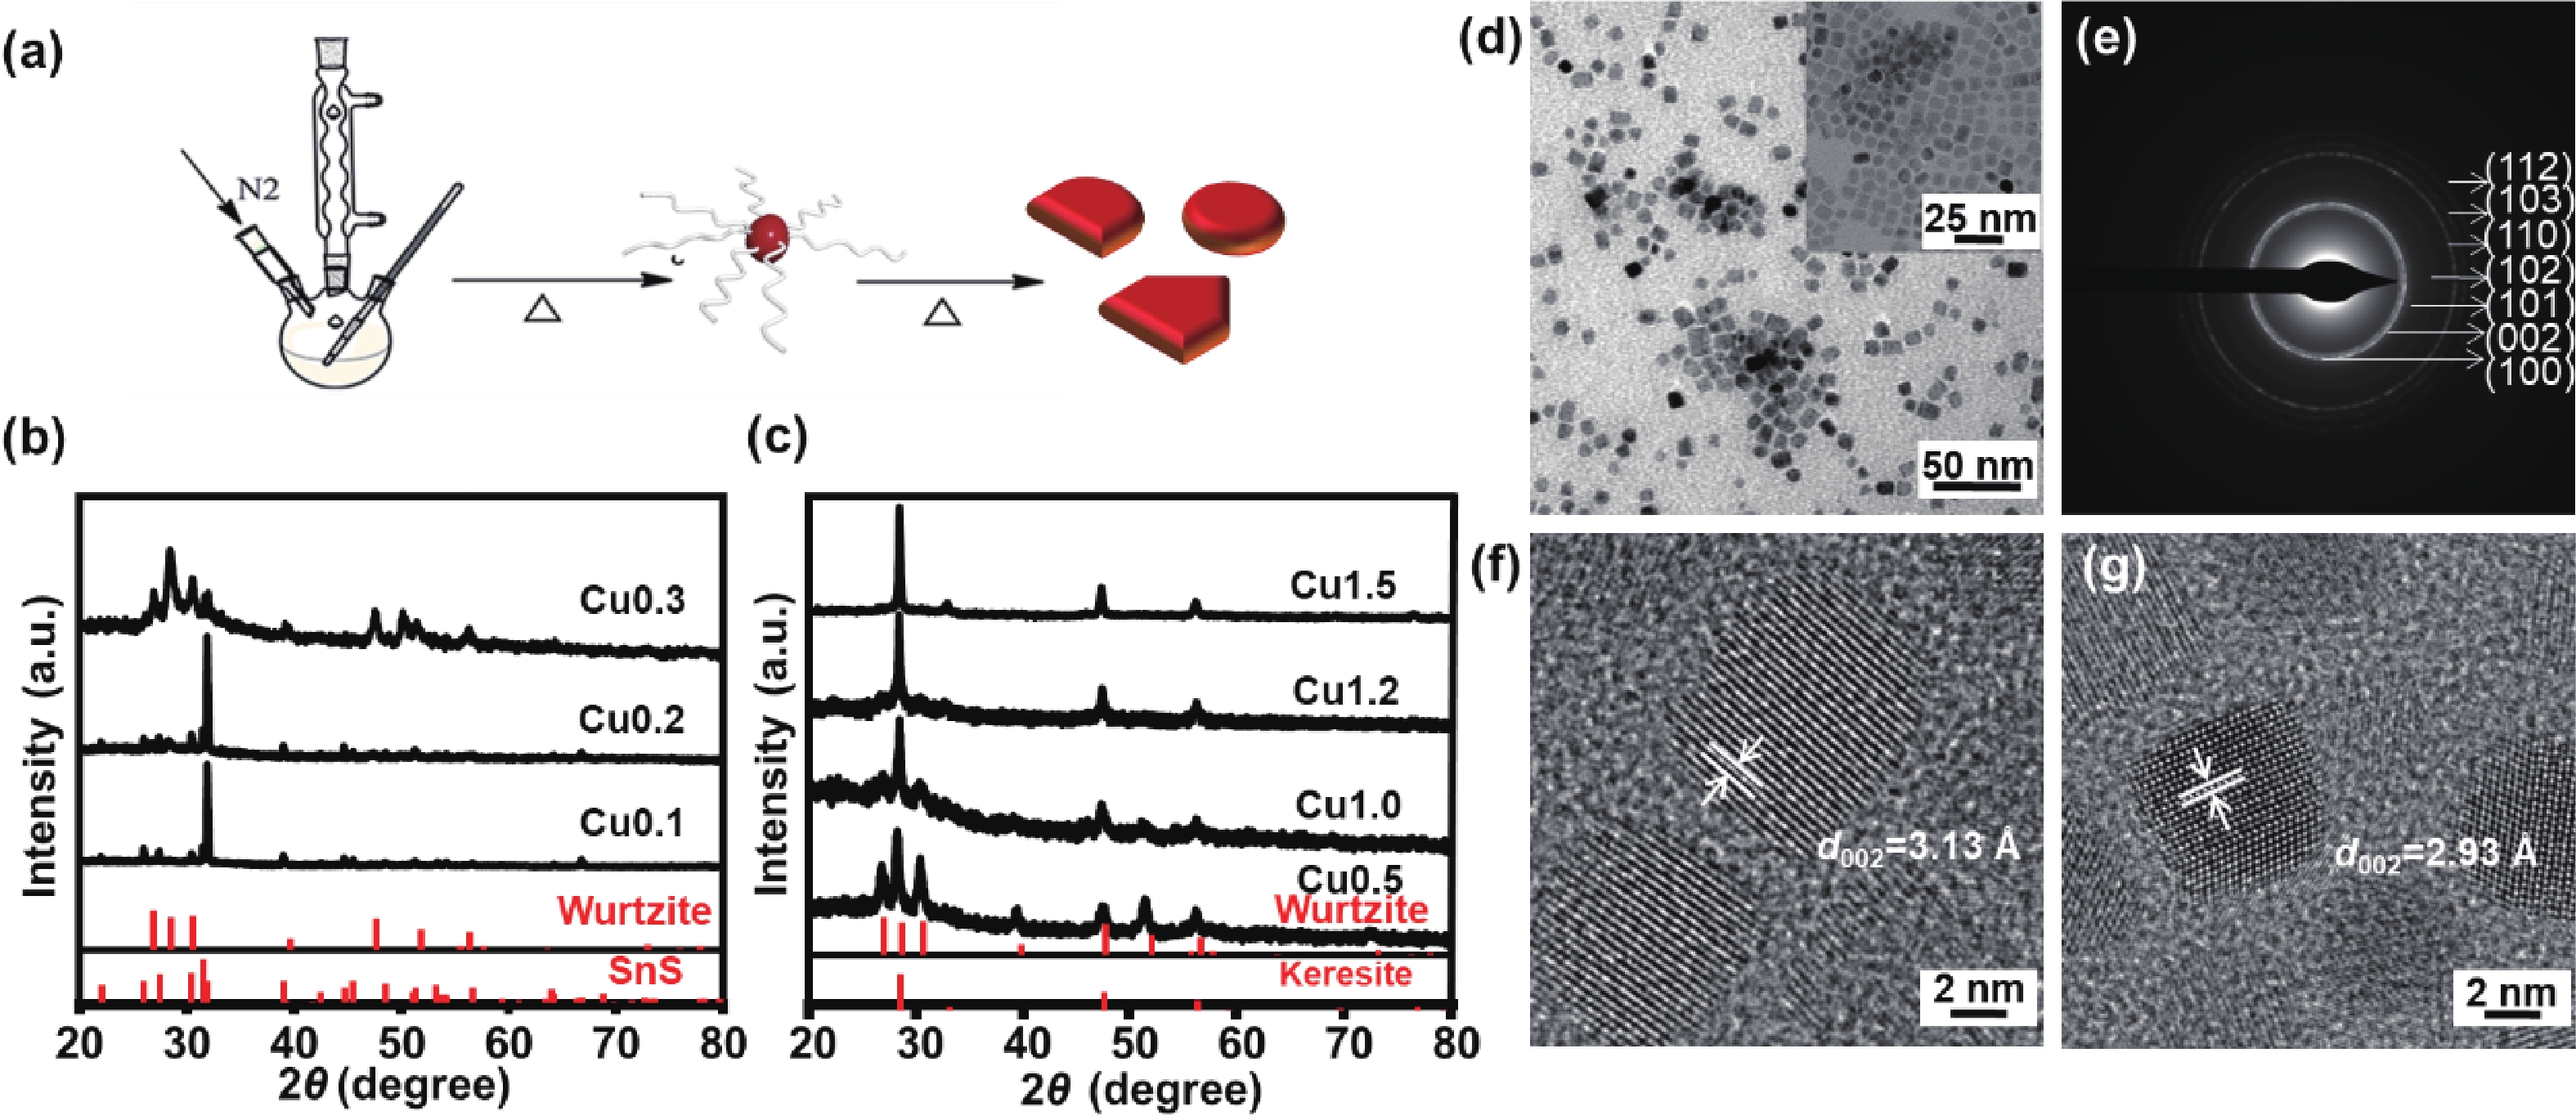 (Color online) (a) Schematic illustration of one-pot synthesis of CZTS nanocrystals. XRD patterns of CZTS nanocrystals obtained at (b) low Cu content, (c) high Cu content. (d) TEM images of hexagonal wurtzite CZTS. The inset is an enlarged view. (e) SAED pattern of hexagonal wurtzite CZTS. (f) HRTEM images of hexagonal wurtzite CZTS nanocrystals in (002) crystal plane and (g) in (101) crystal plane.